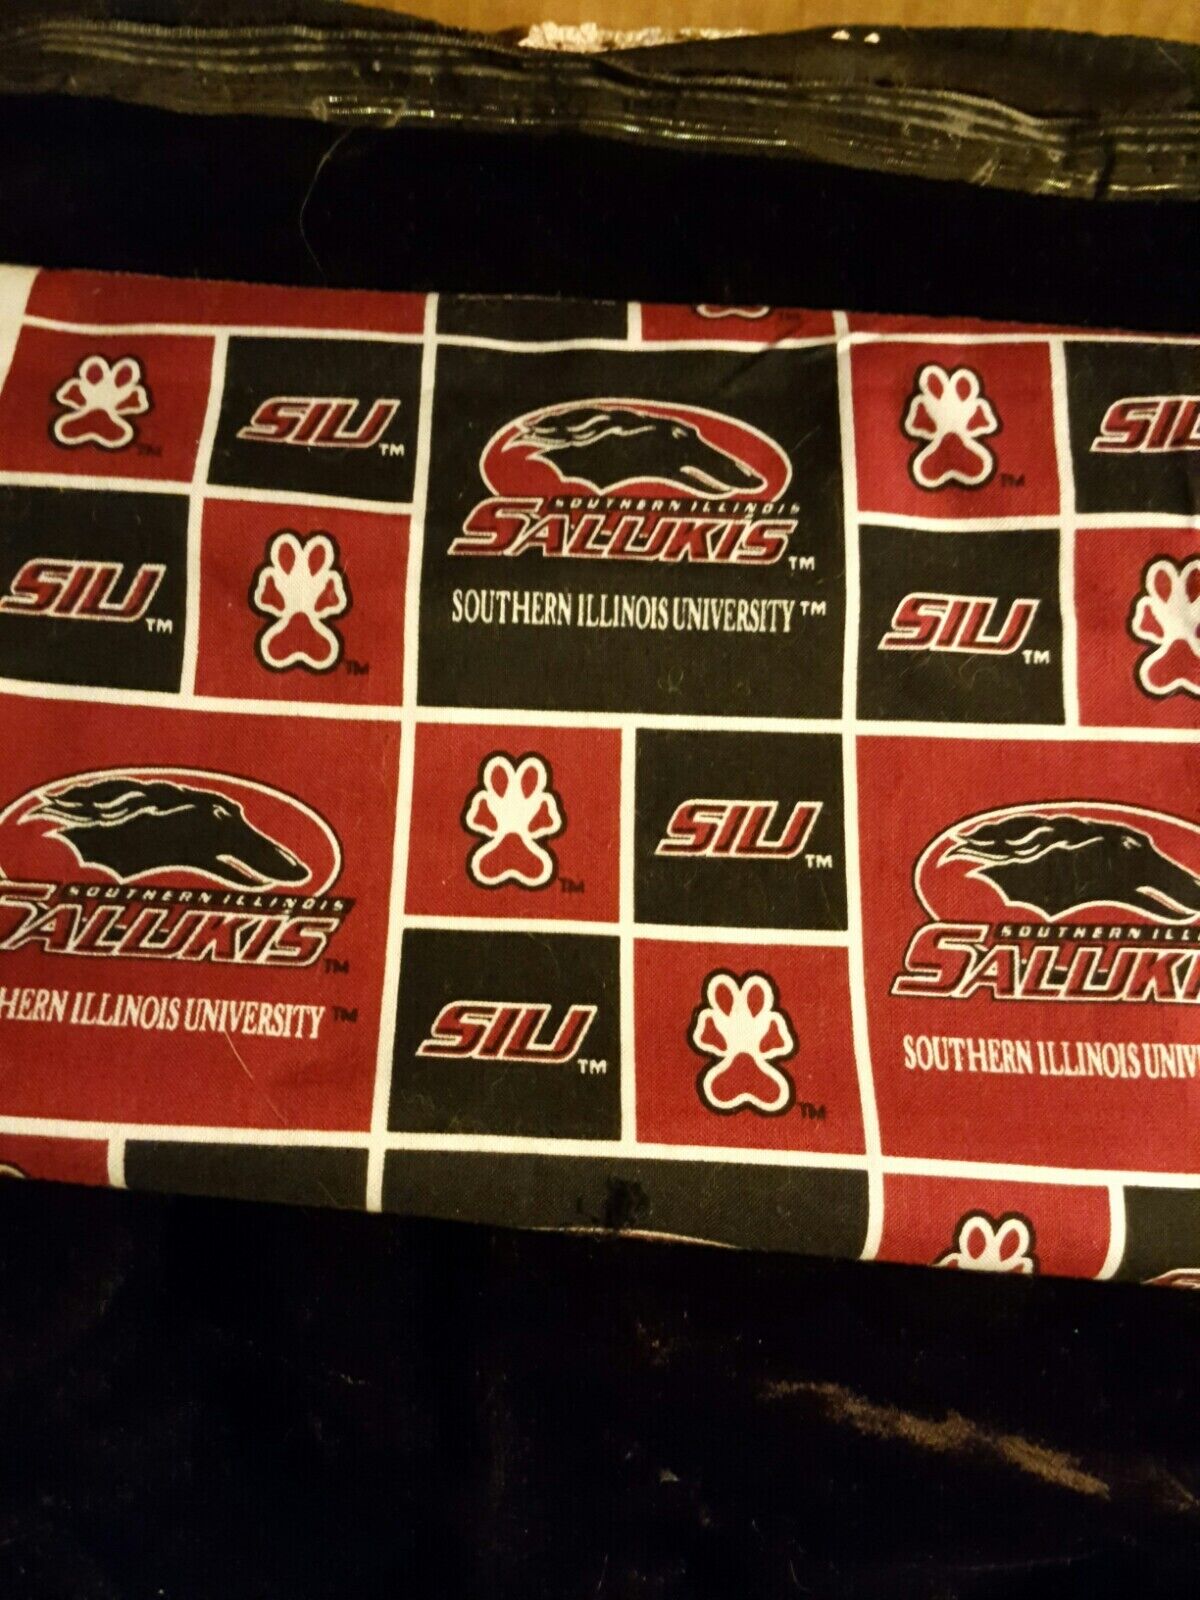 Siu Carbondale  Salukis Fabric,approx 3/4 Yd.